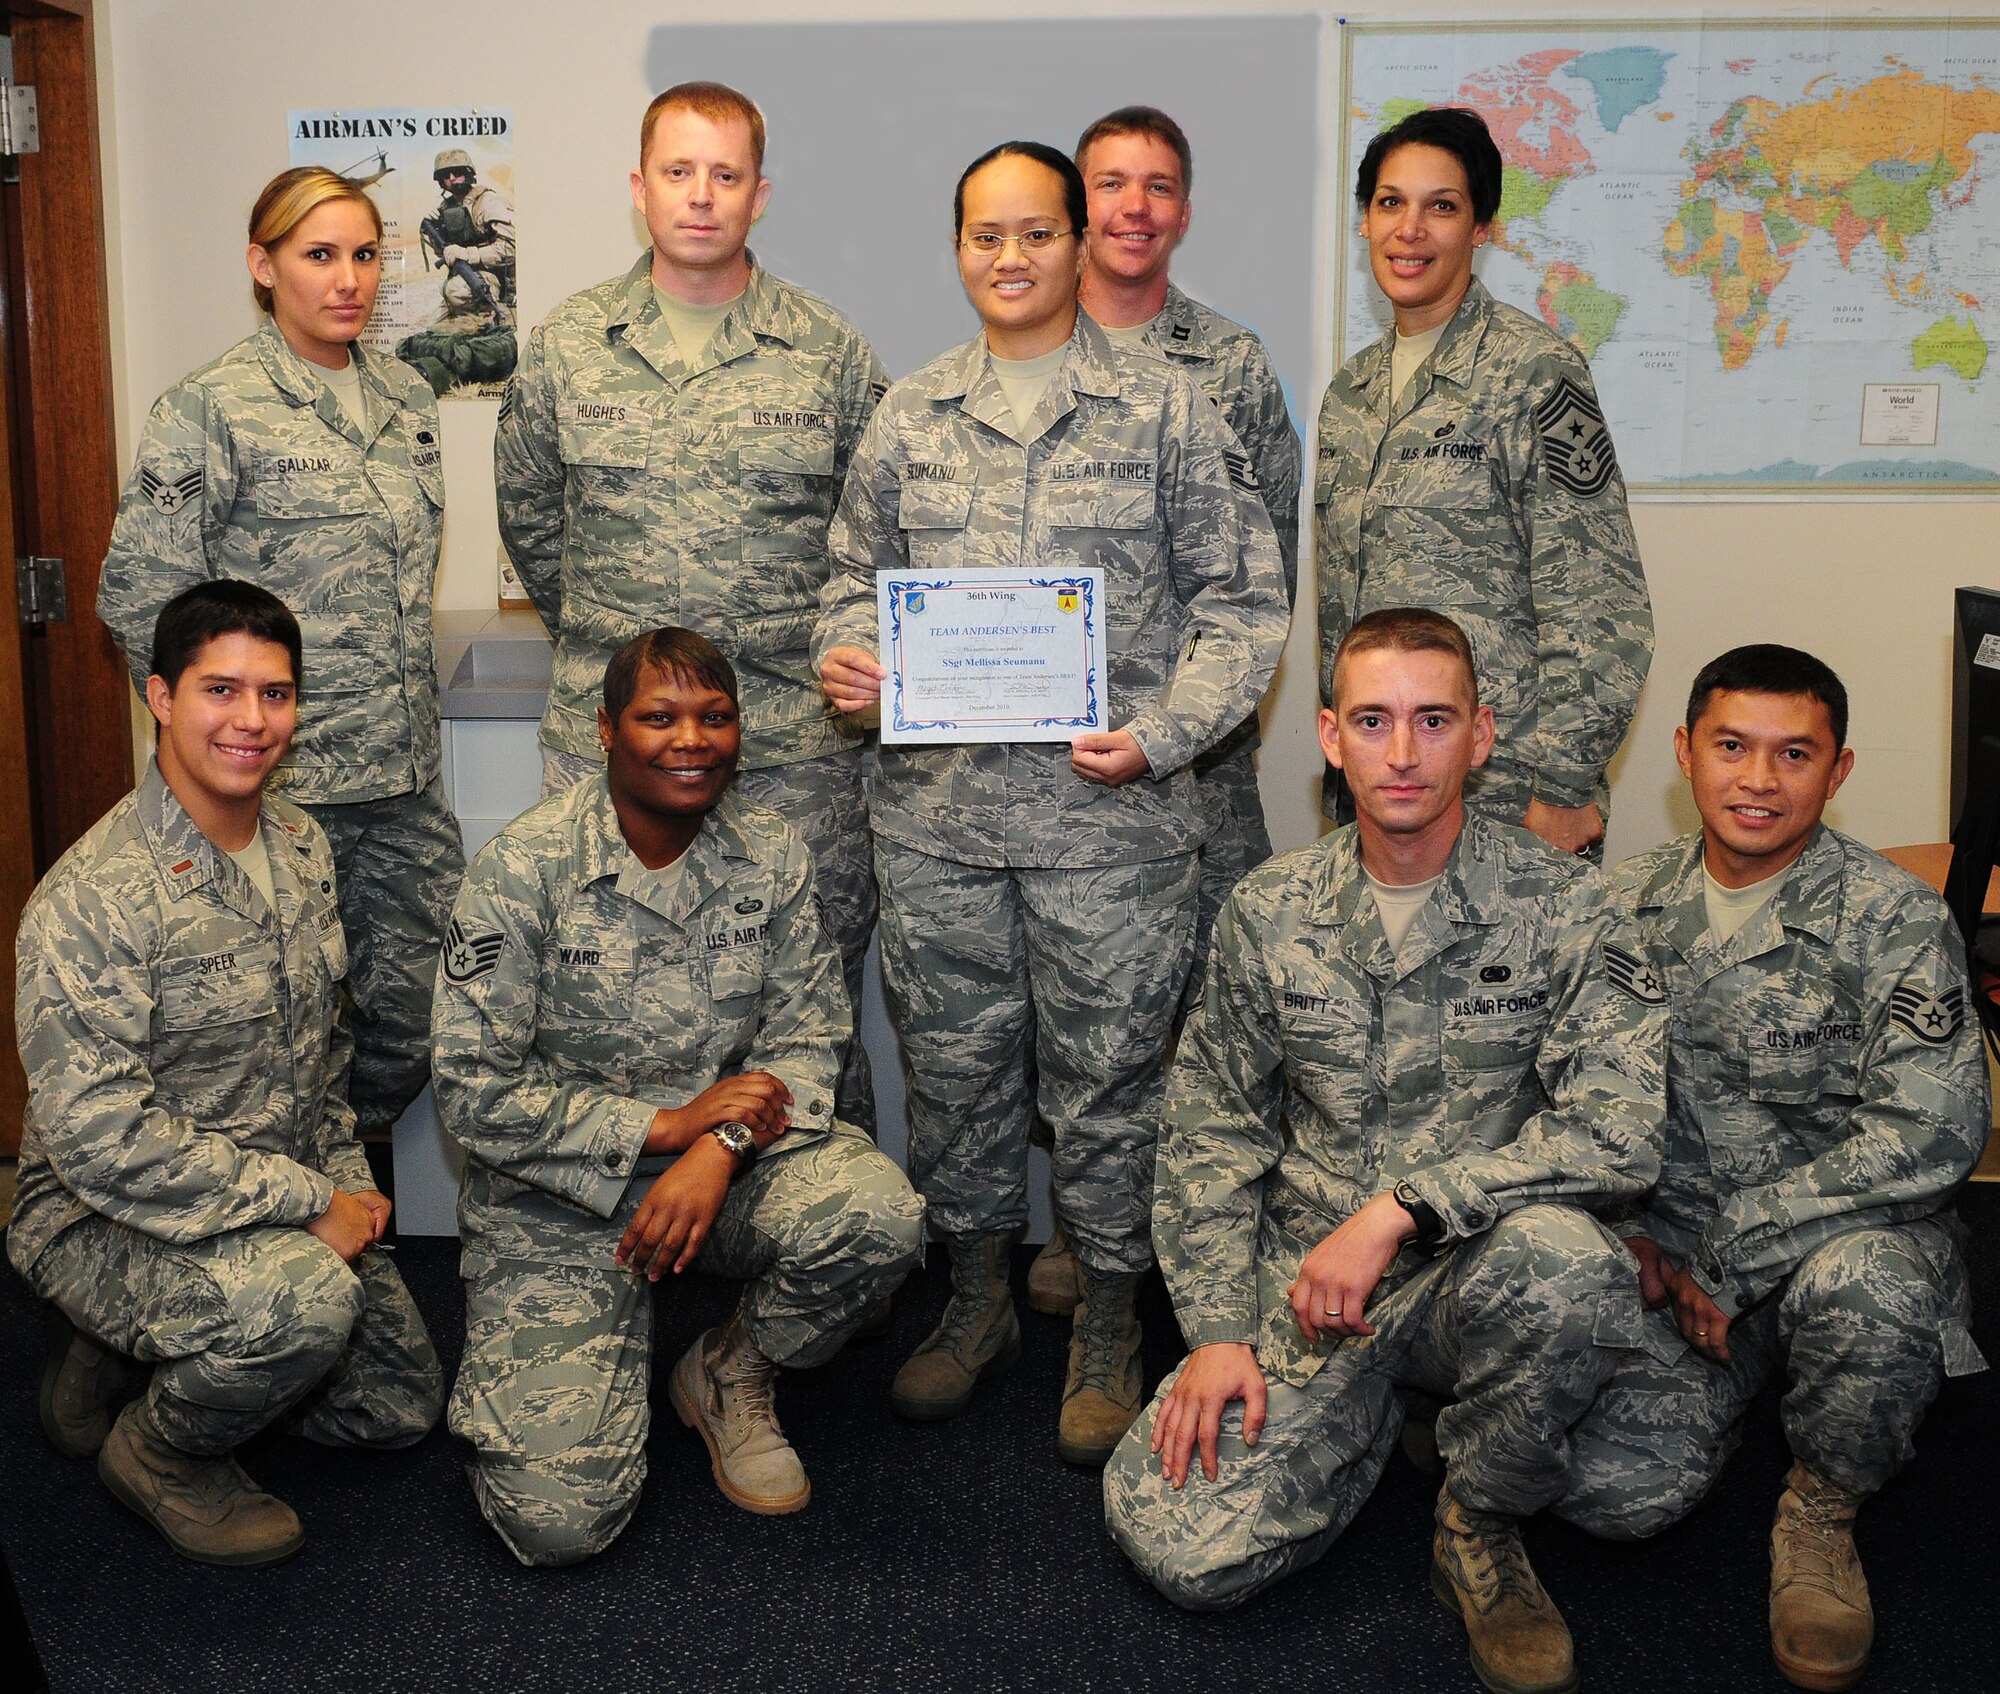 Staff Sgt. Mellissa Seumanu (center) stands with her peers after being awarded Andersen's Best here Dec. 16. As 36th Logistics Readiness Squadron deployment manager, Sergeant Seumanu ensures the 36th Wing quickly fills all Air Expeditionary Force taskings providing Pacific Air Power from Andersen Air Force Base. Andersen's Best is a recognition program which highlights a top performer from the 36th Wing. (Photo illustration/Senior Airman Nichelle Anderson)